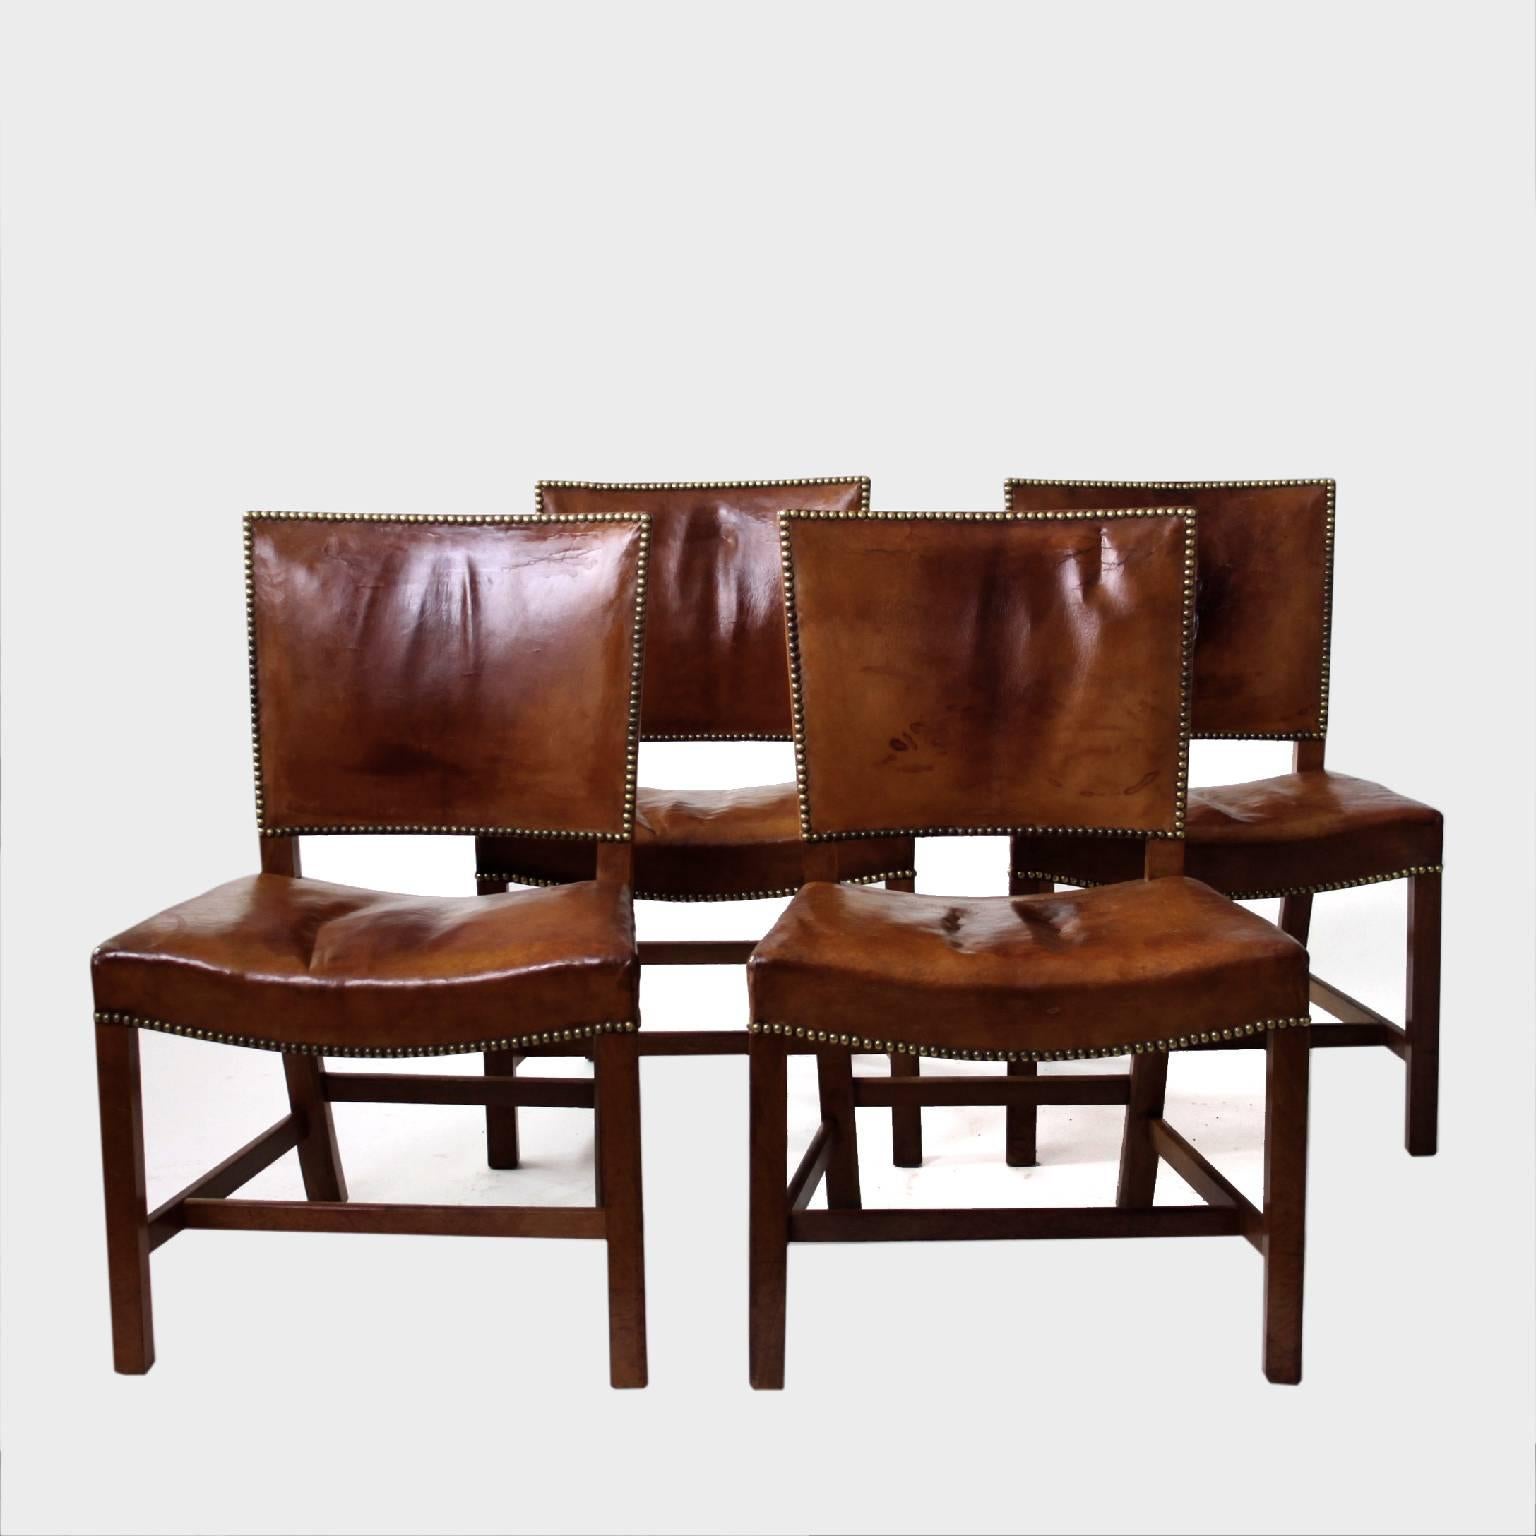 KAARE KLINT & RUD RASMUSSEN SNEDKERIER - SCANDINAVIAN MODERN

A beautiful set of four early Kaare Klint red chairs / Barcelona chairs with mahogany frame, brass nails and original patinated Niger leather that the Kaare Klint red chairs are so famous